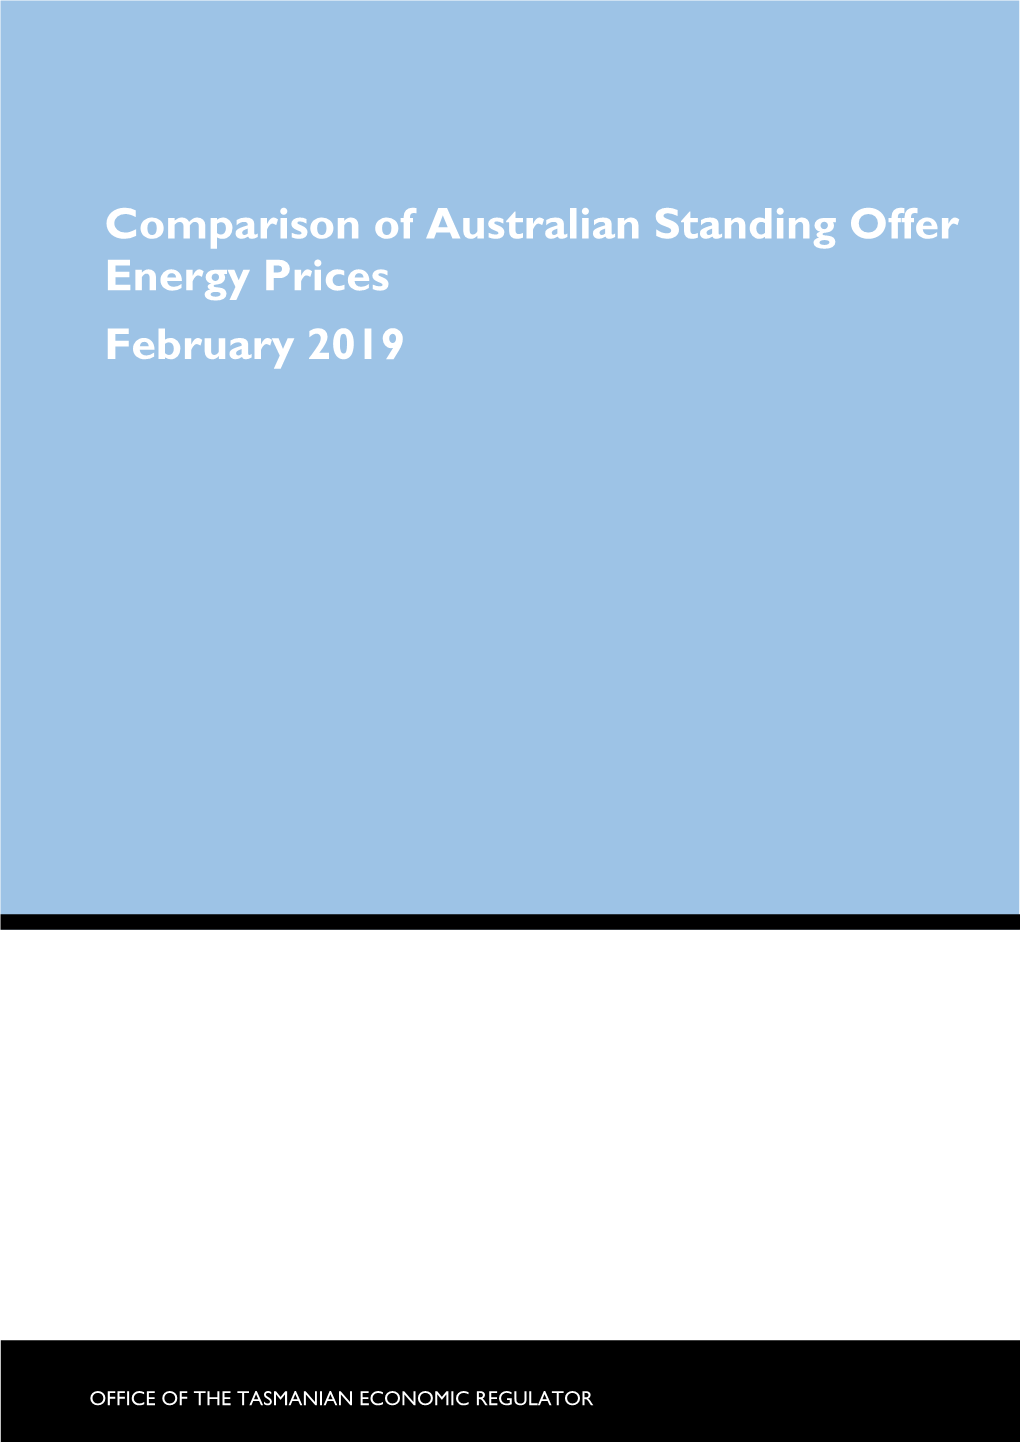 Comparison of Australian Standing Offer Energy Prices February 2019